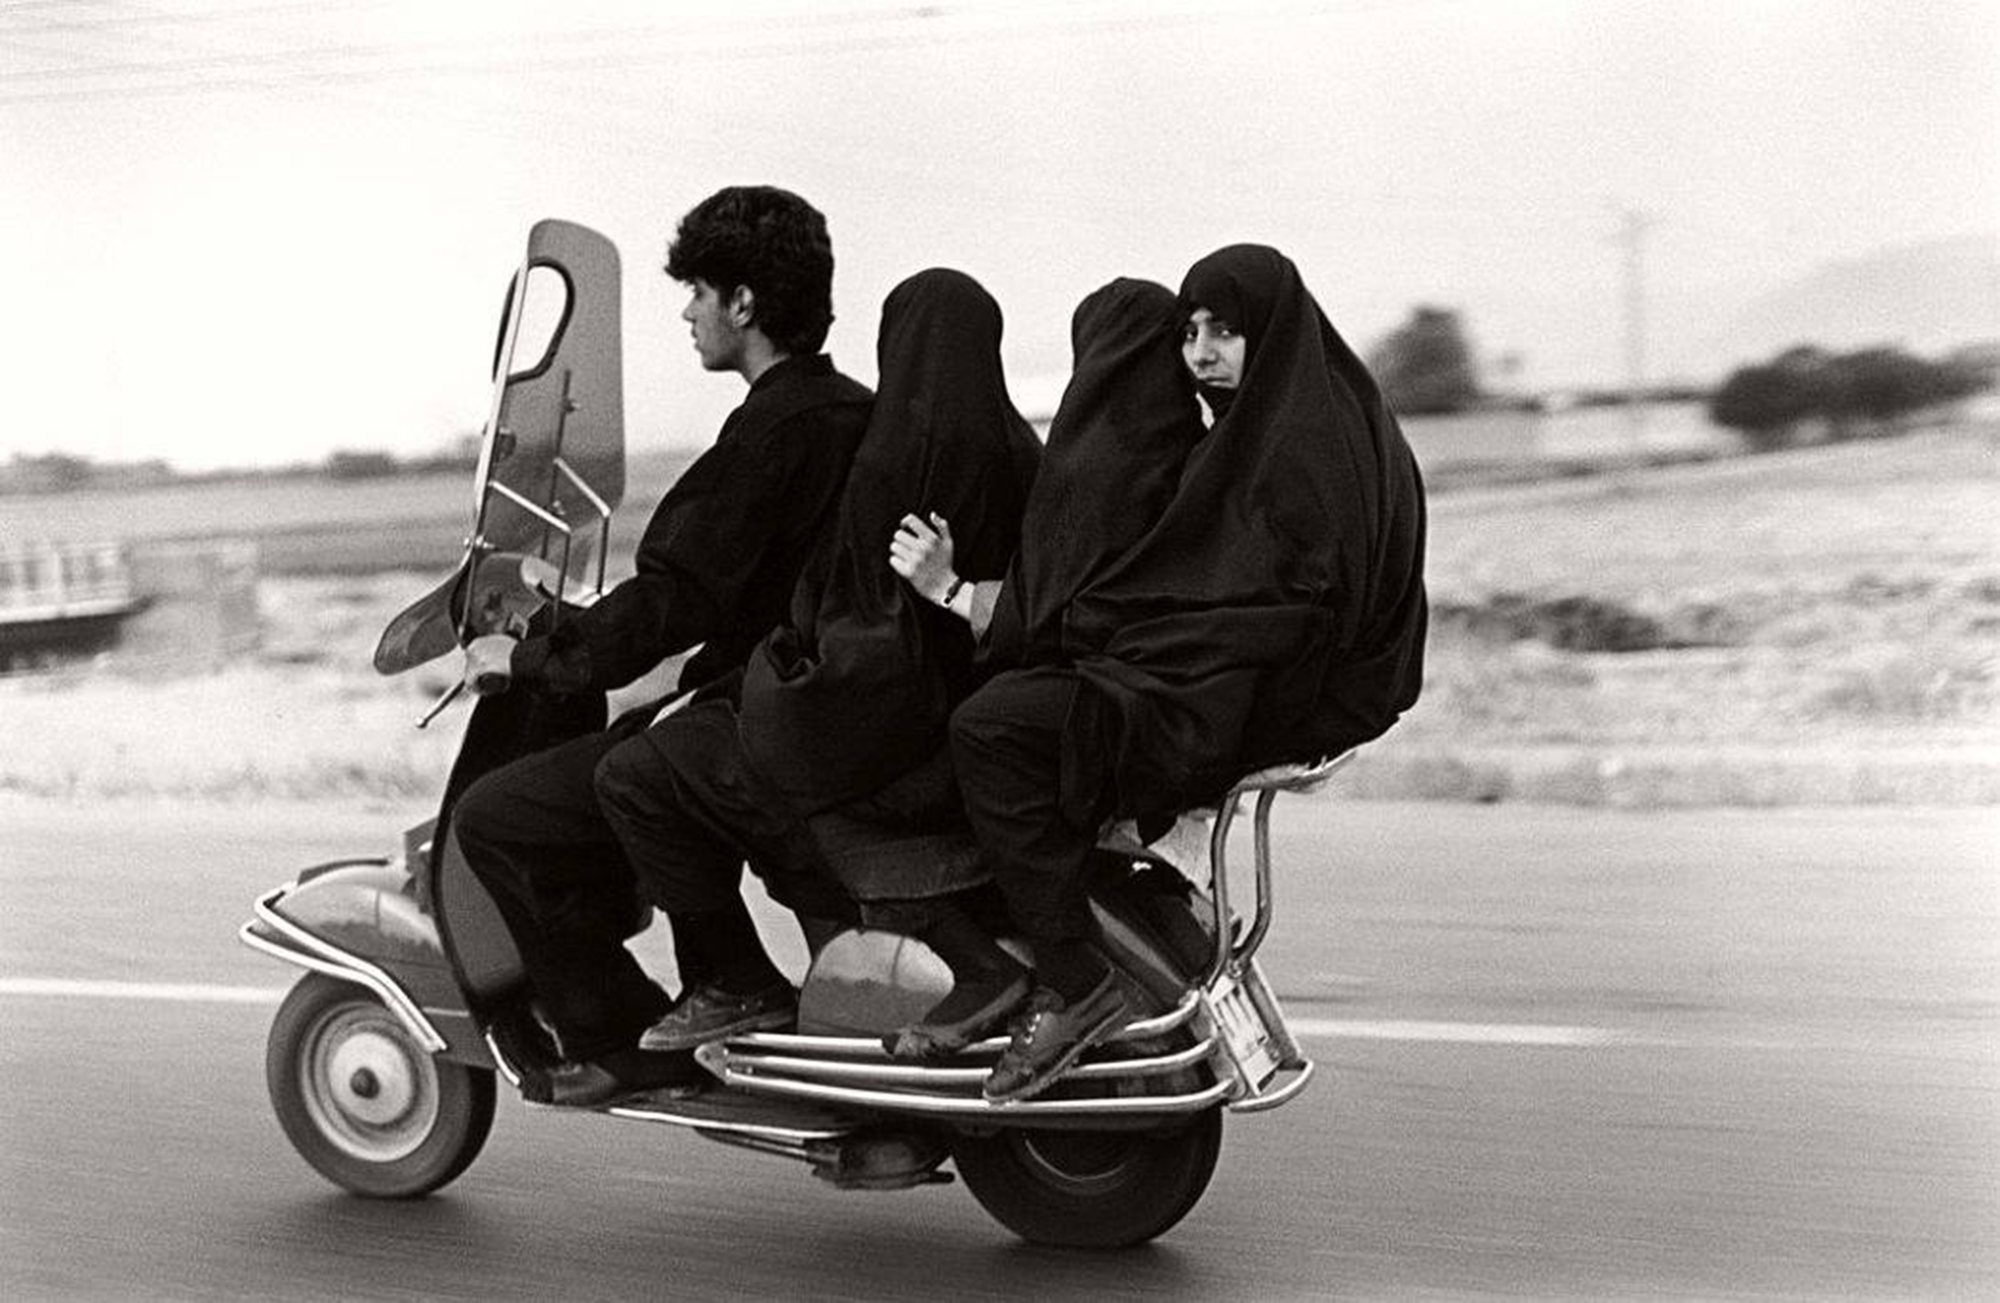 Young man, three veiled girls in a four-seater motorbike © Abbas Attar, Iran, 1997